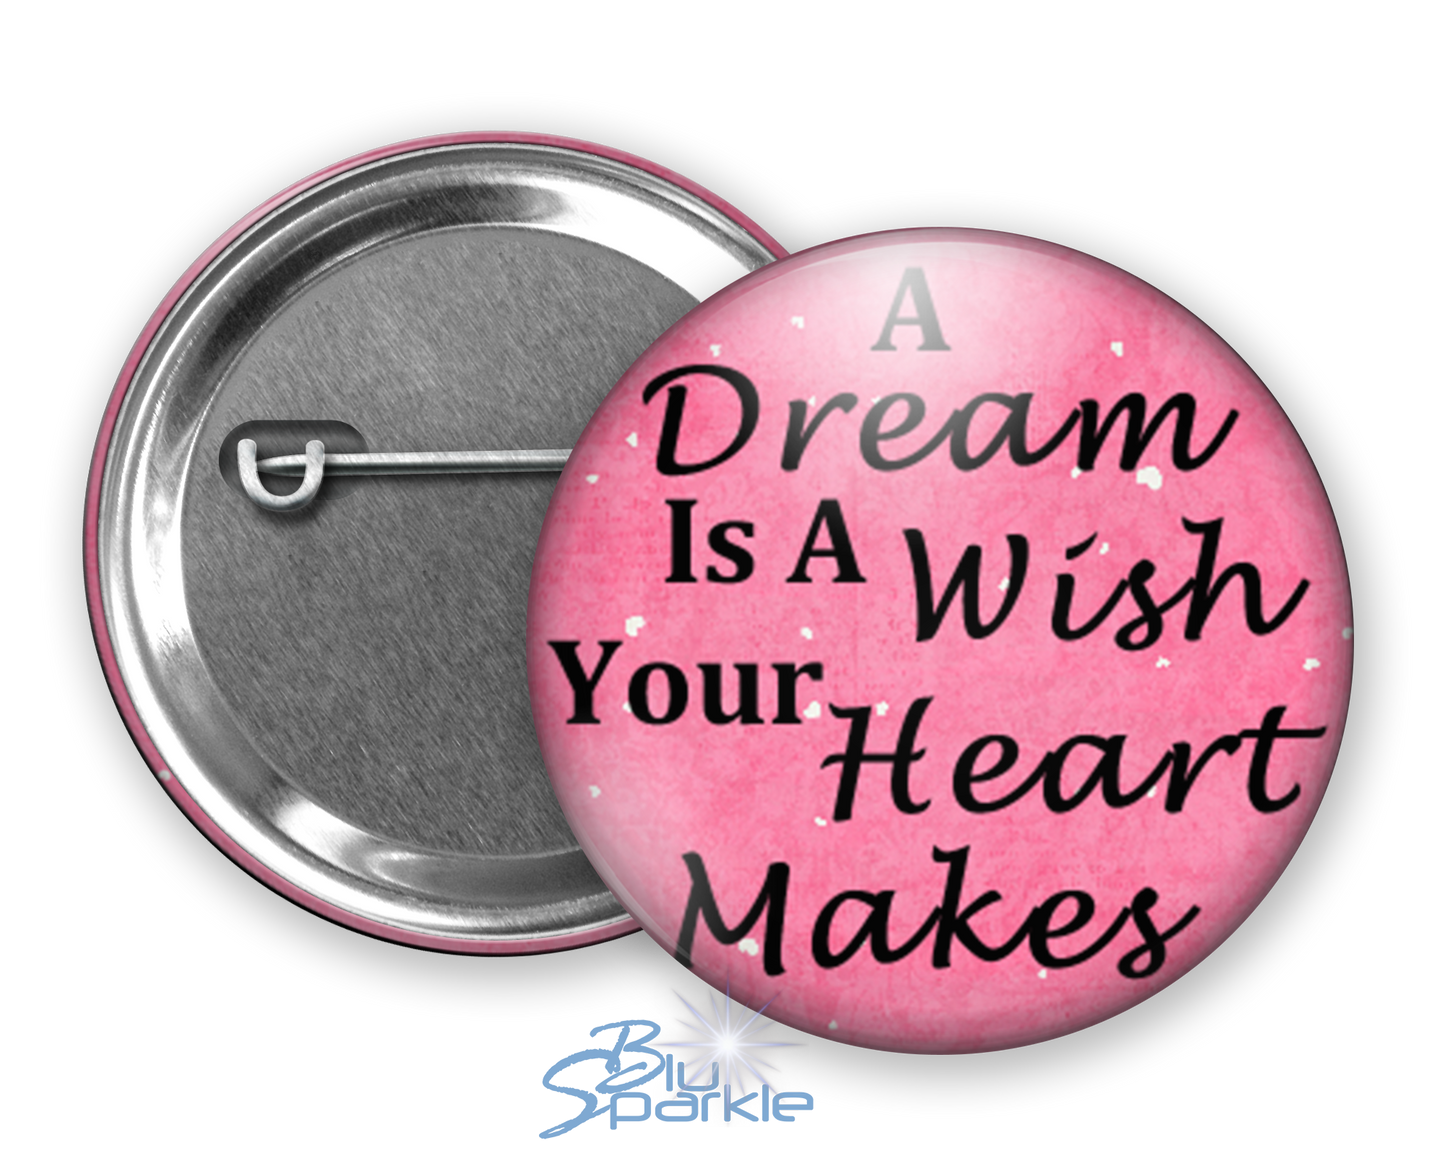 A Dream Is A Wish Your Heart Makes - Pinback Button